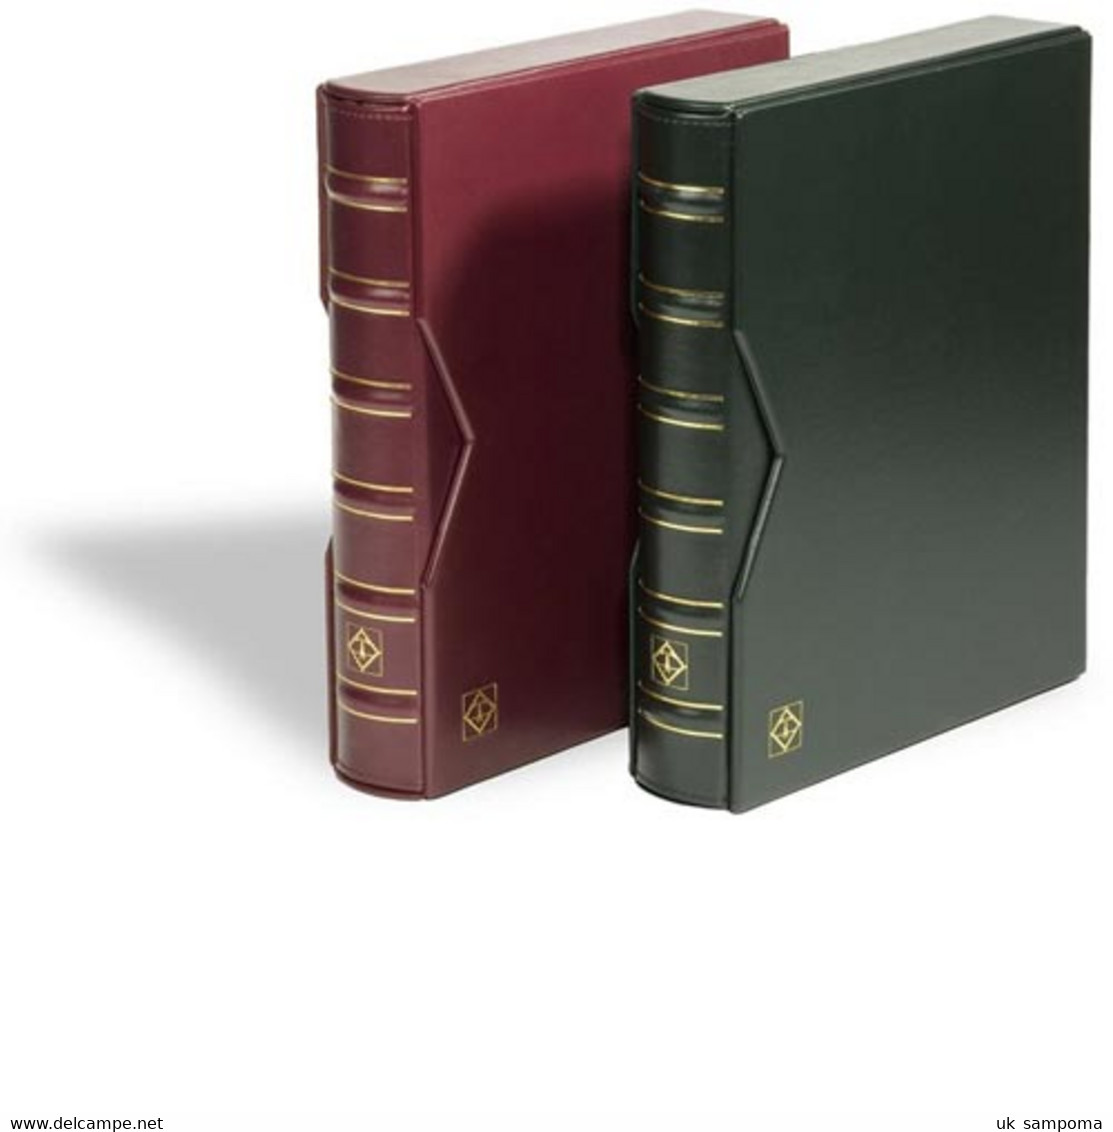 Ringbinder VARIO, In Classic Design Incl. Slipcase, Green - Large Format, Black Pages